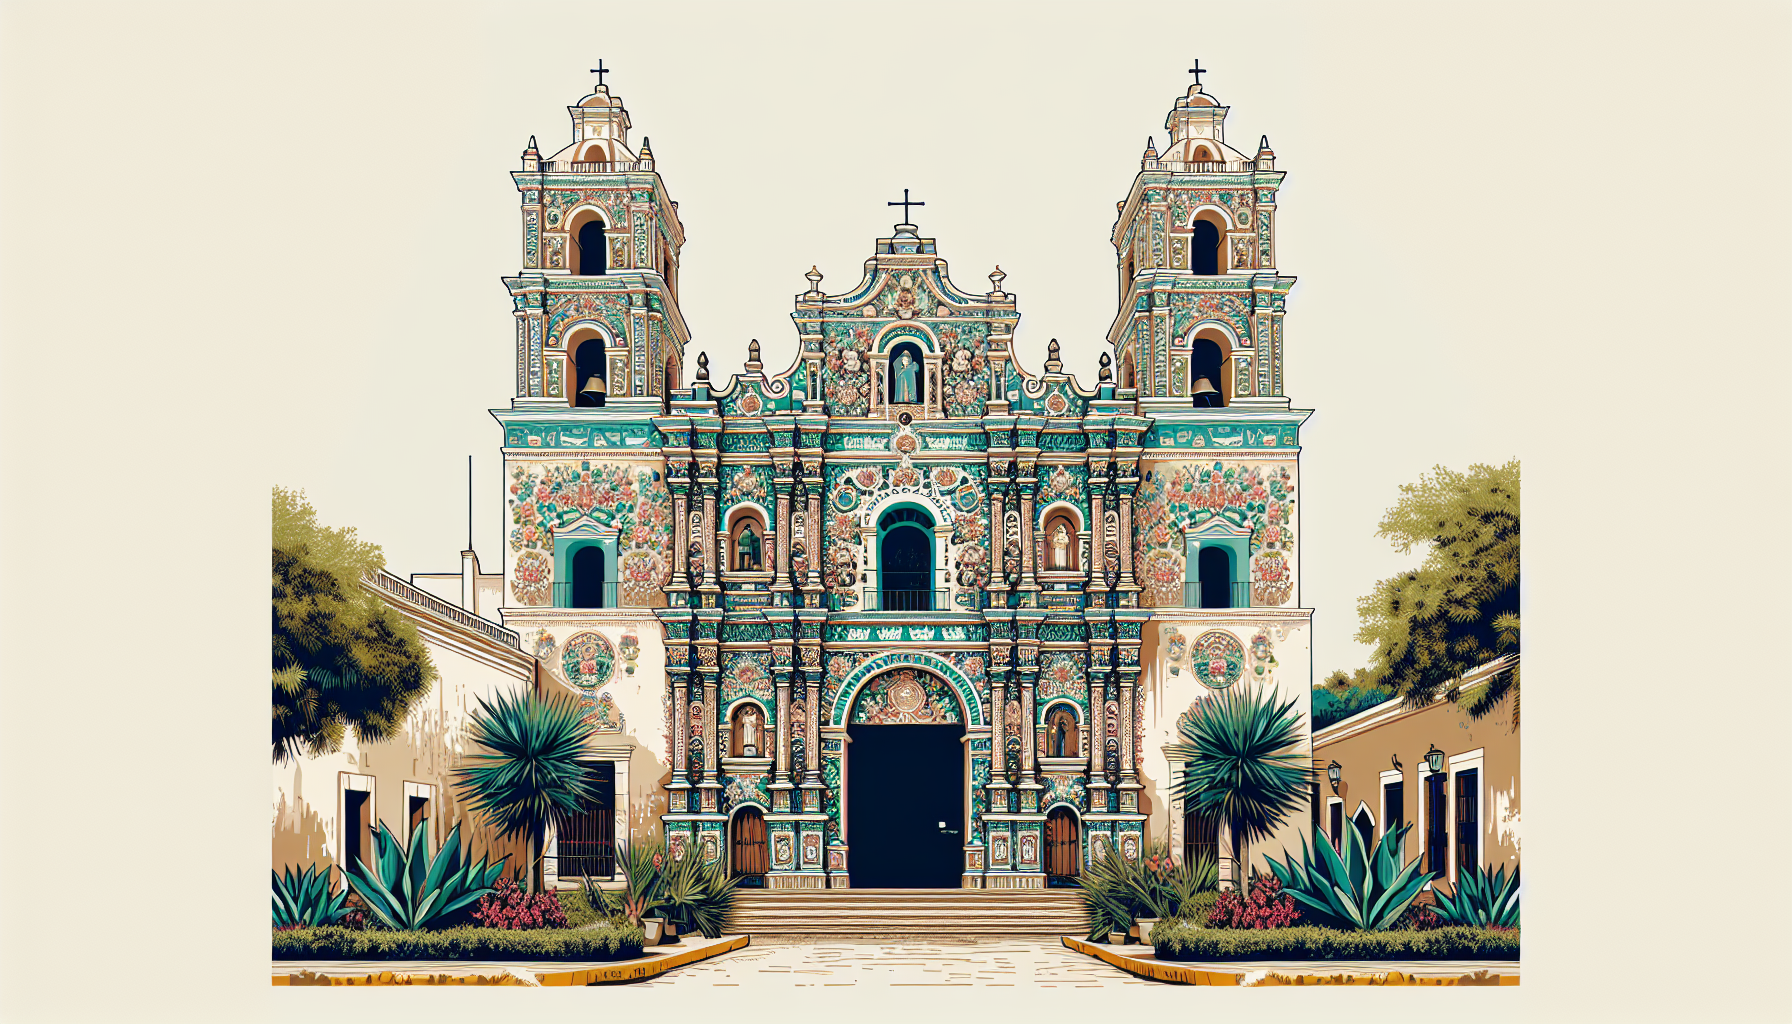 Create an image of a beautiful colonial church in Mérida, Yucatán, Mexico. The church should have intricate details on its facade, vibrant colors reflecting the local culture, and lush greenery surrou